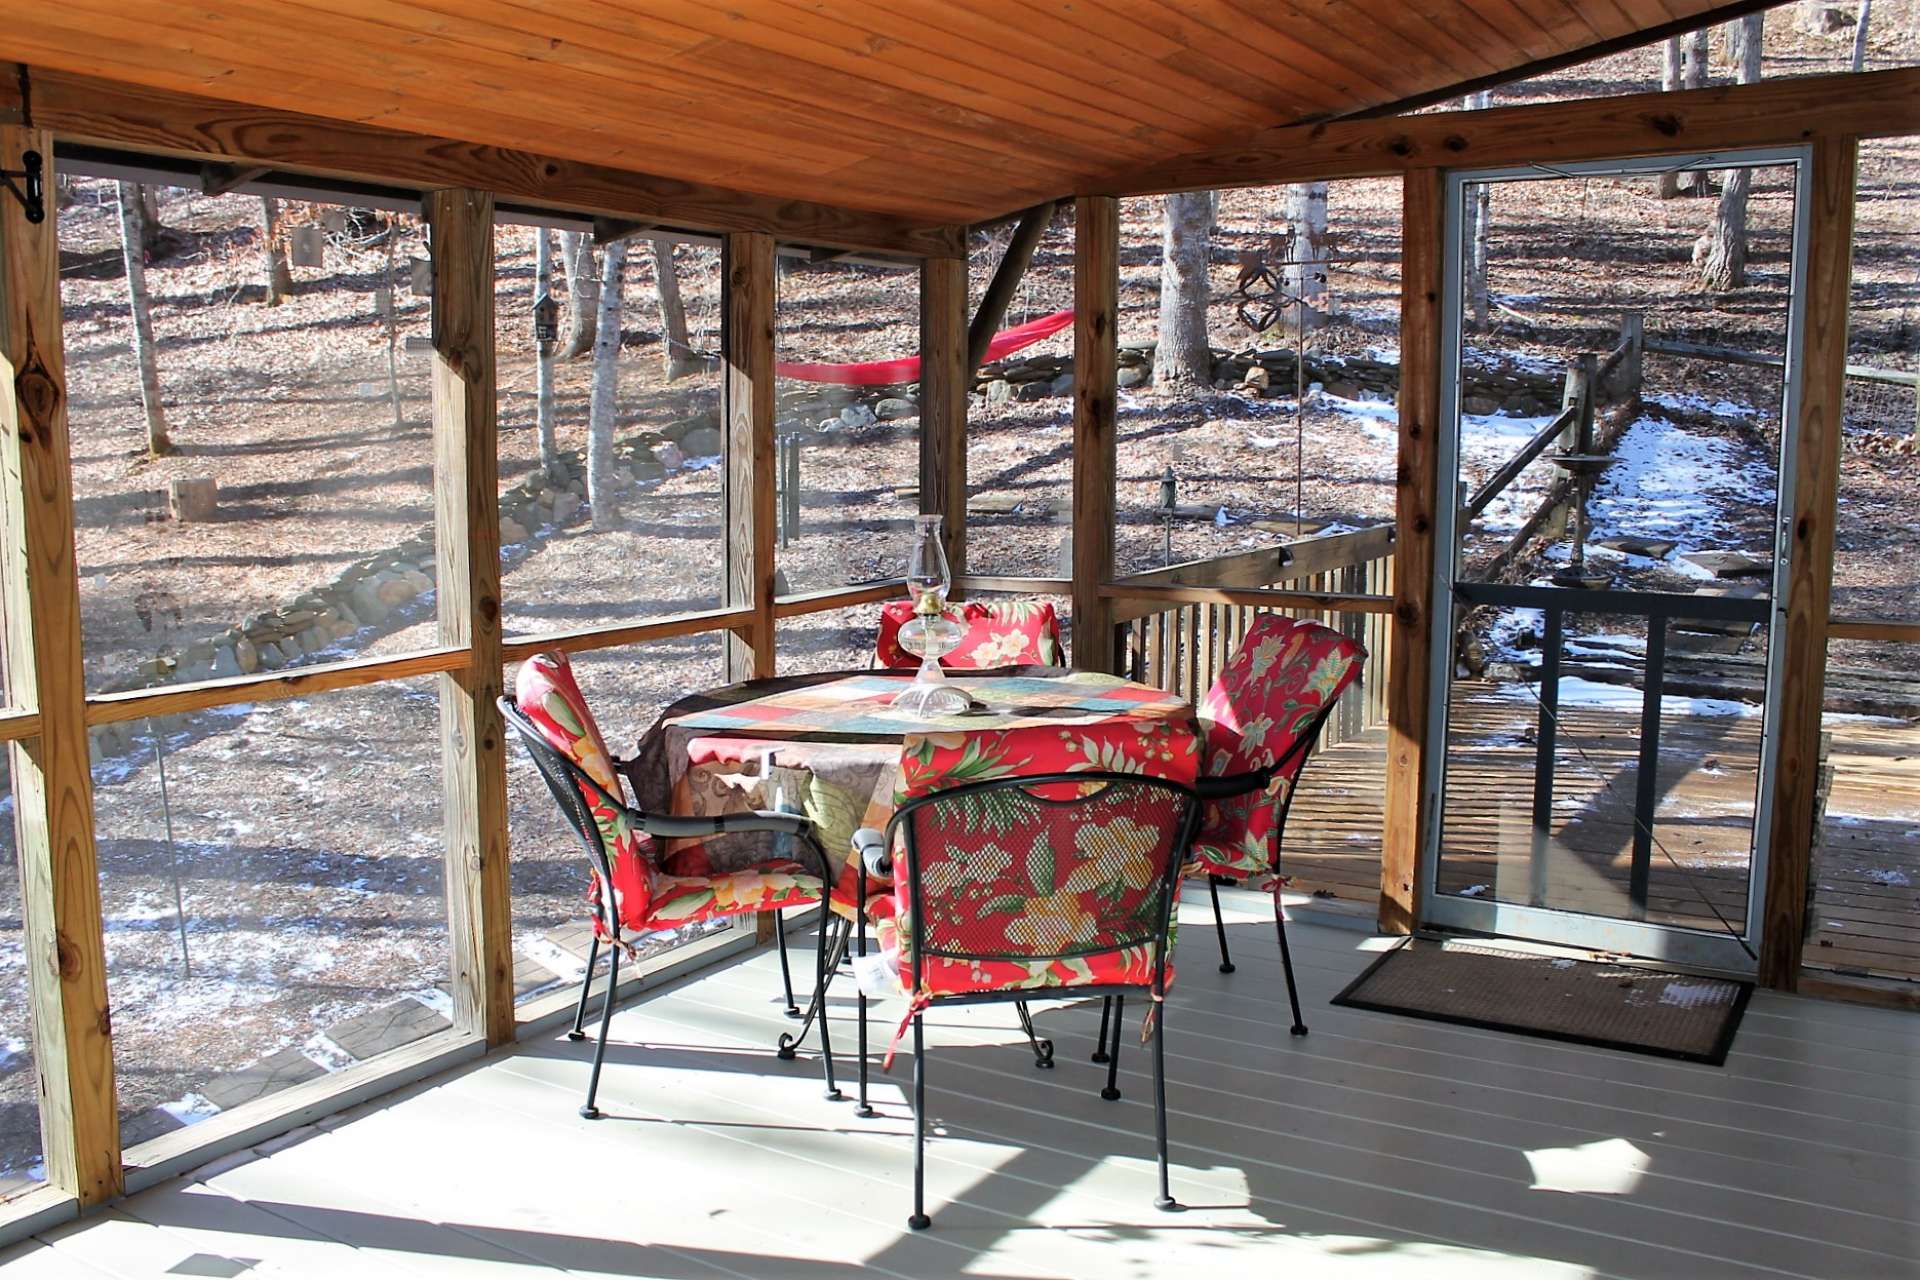 Ideal area for outdoor dining and expands living space during warmer months.